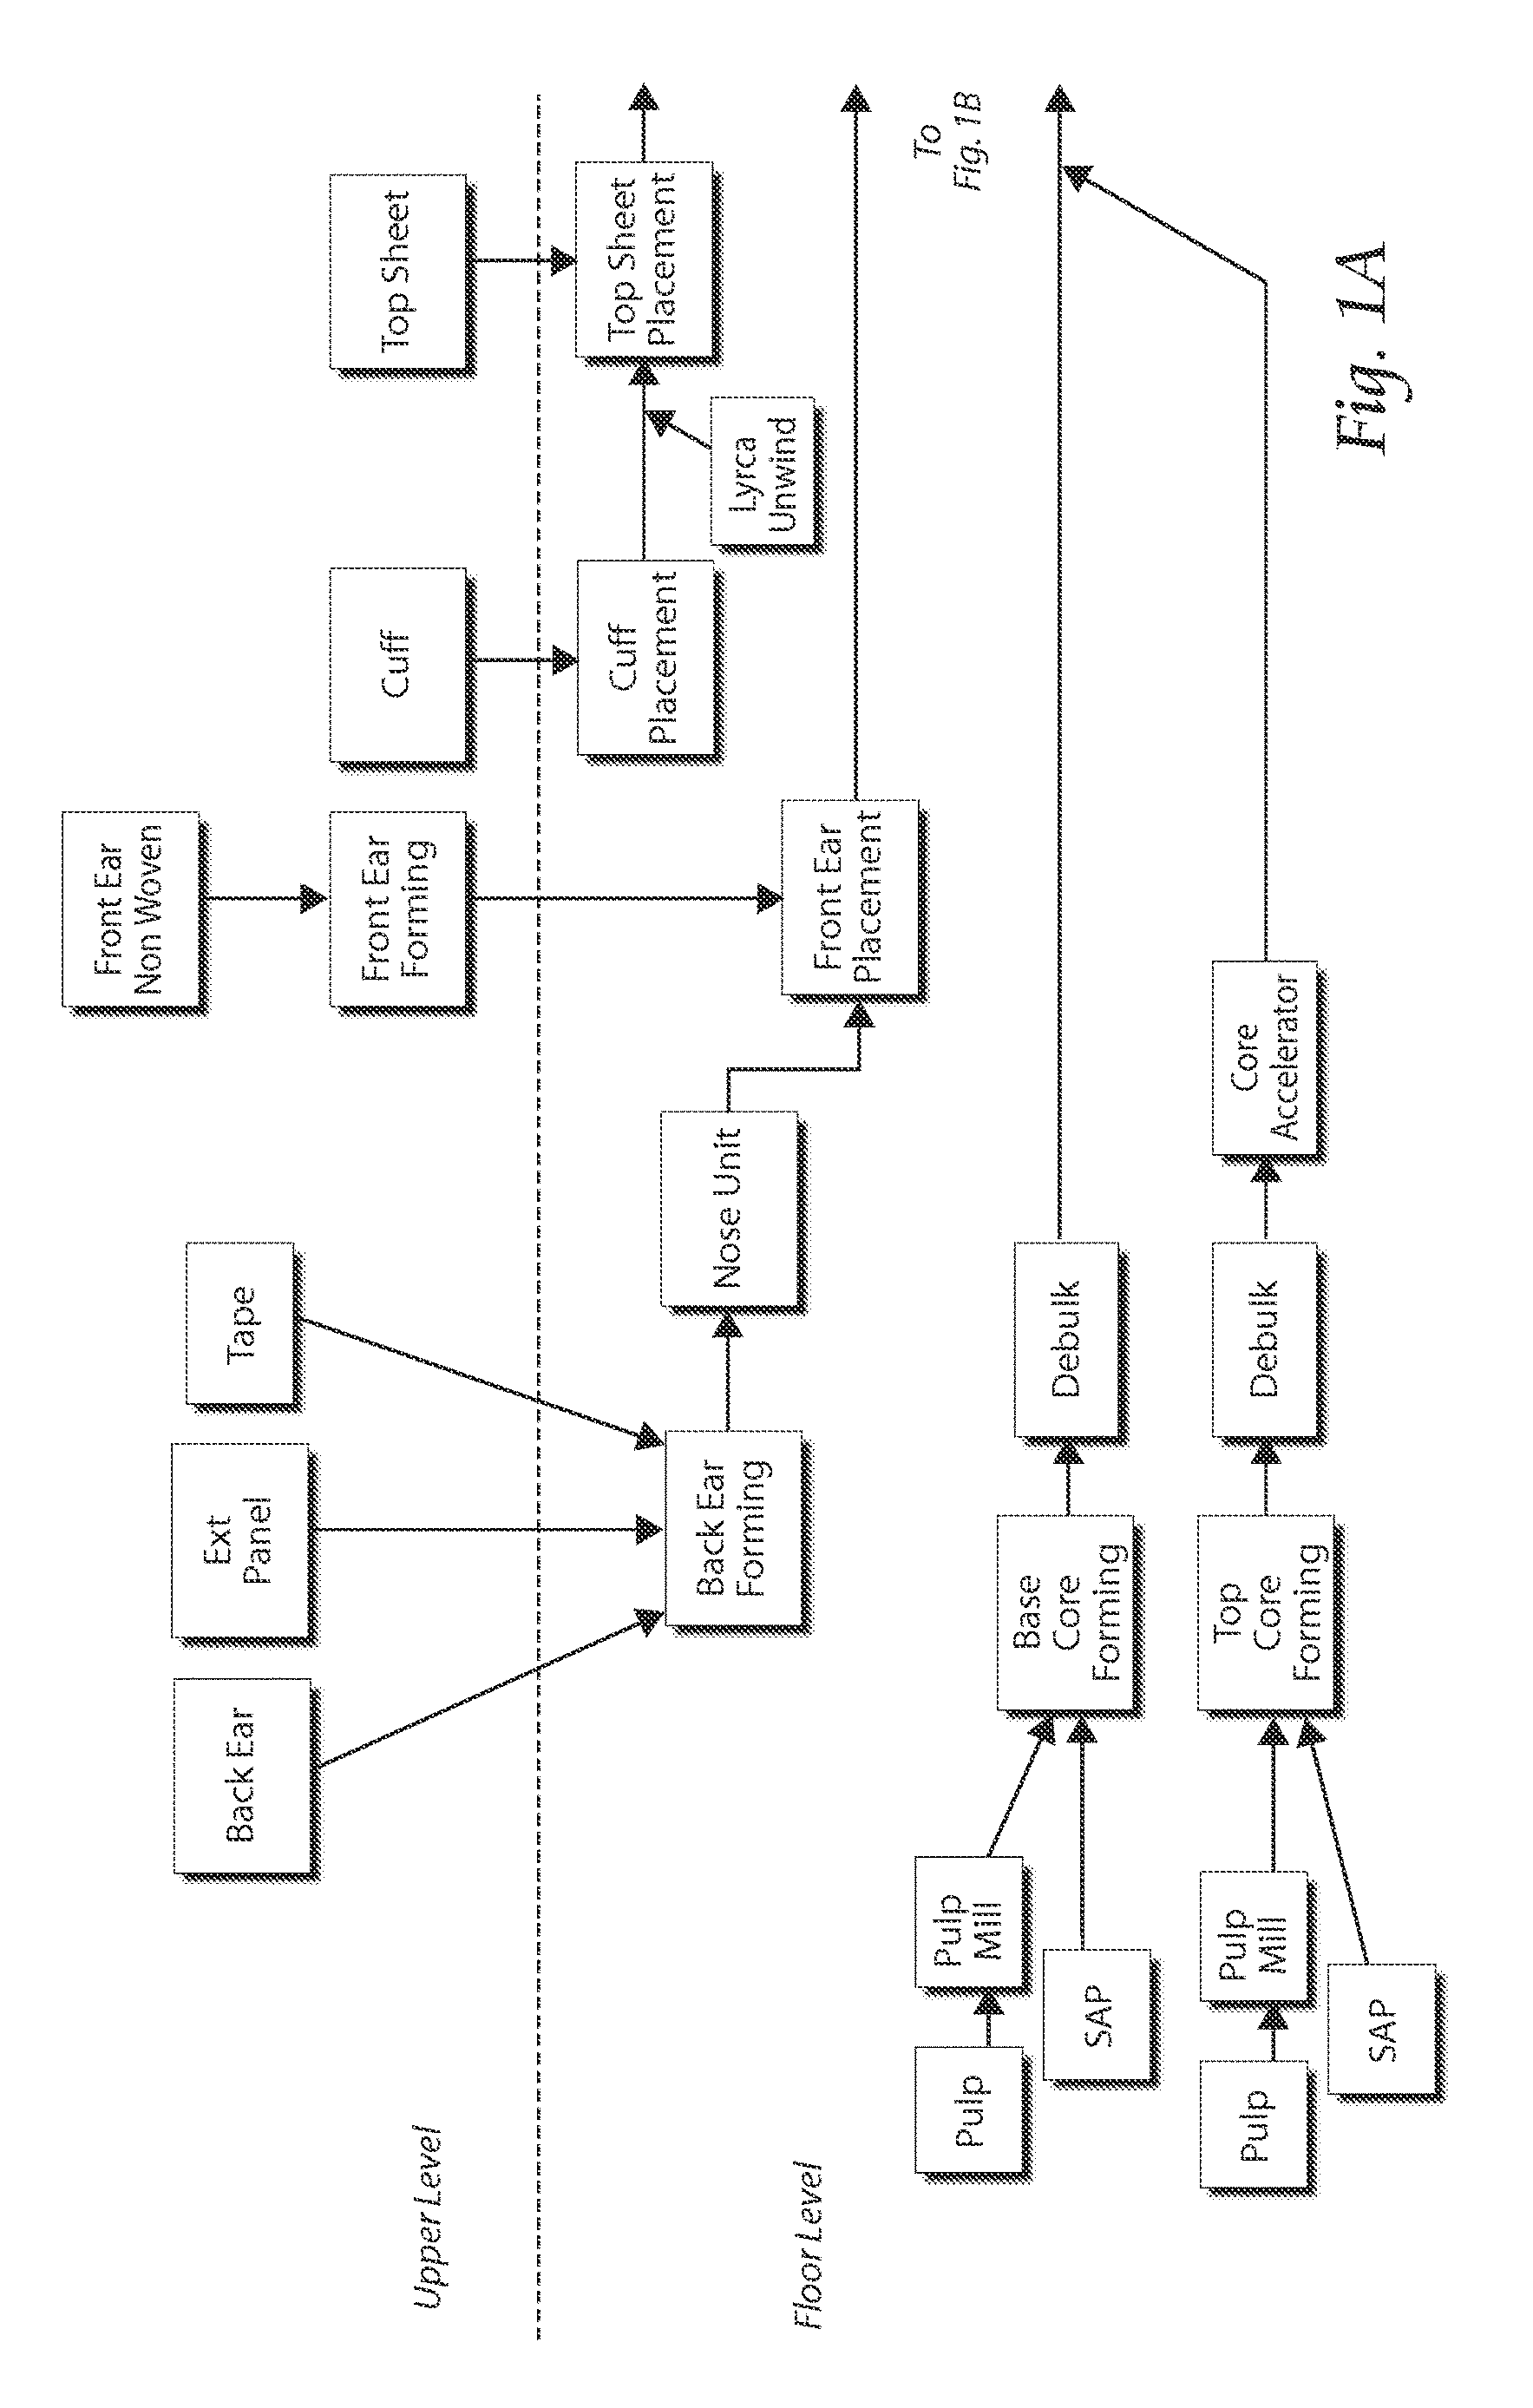 Methods and apparatus for forming disposable products at high speeds with small machine footprint